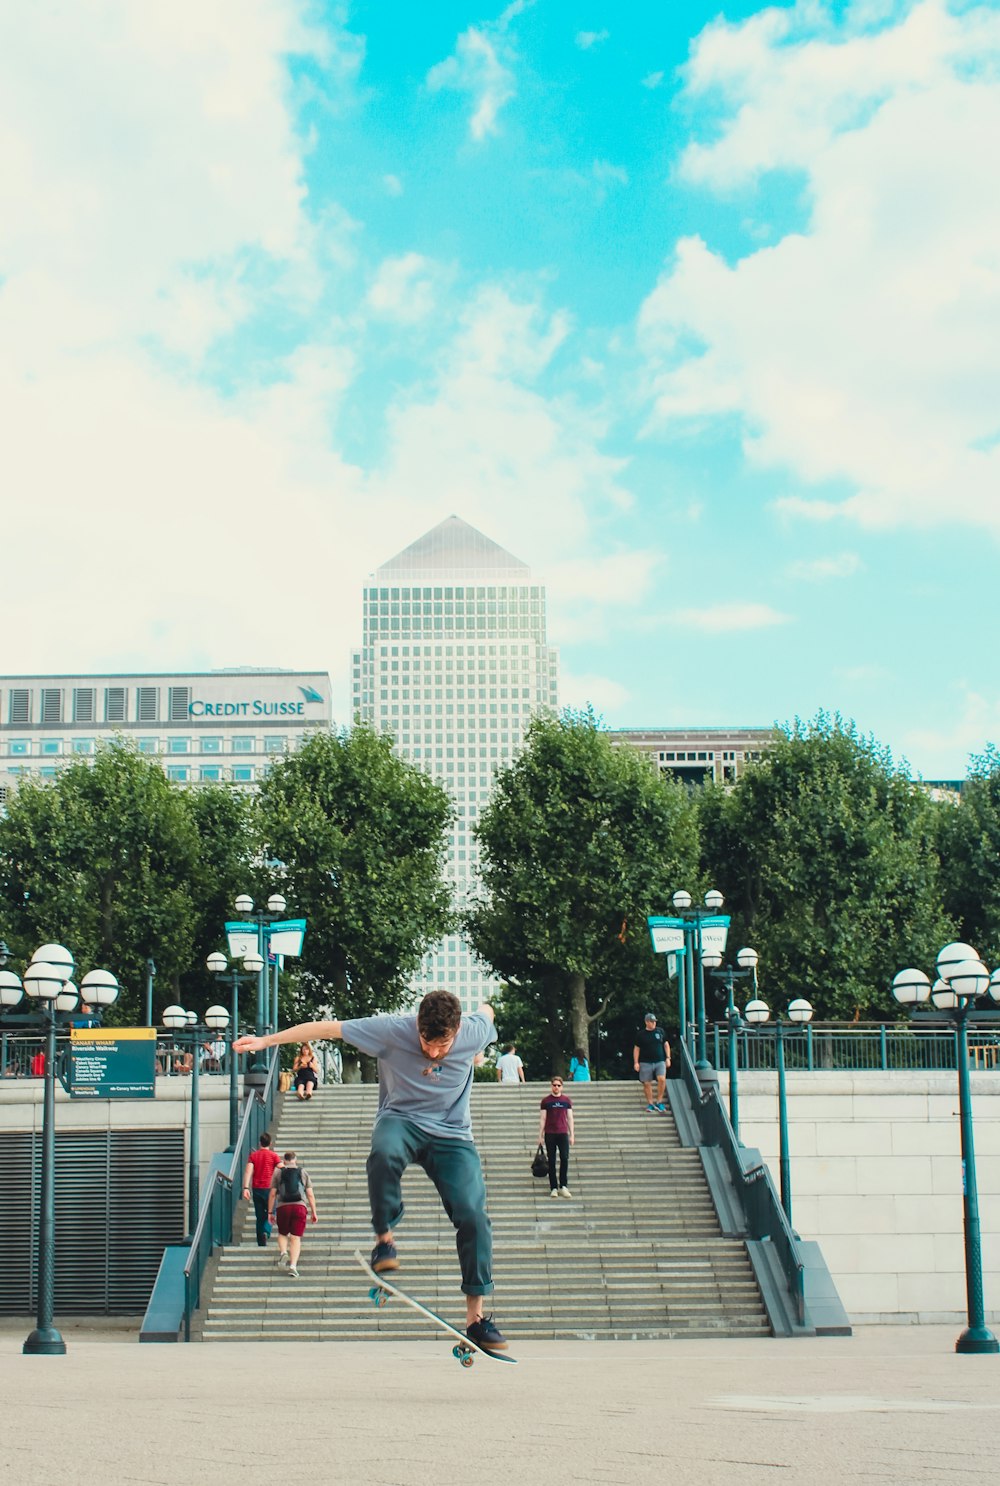 a man riding a skateboard down the side of a flight of stairs